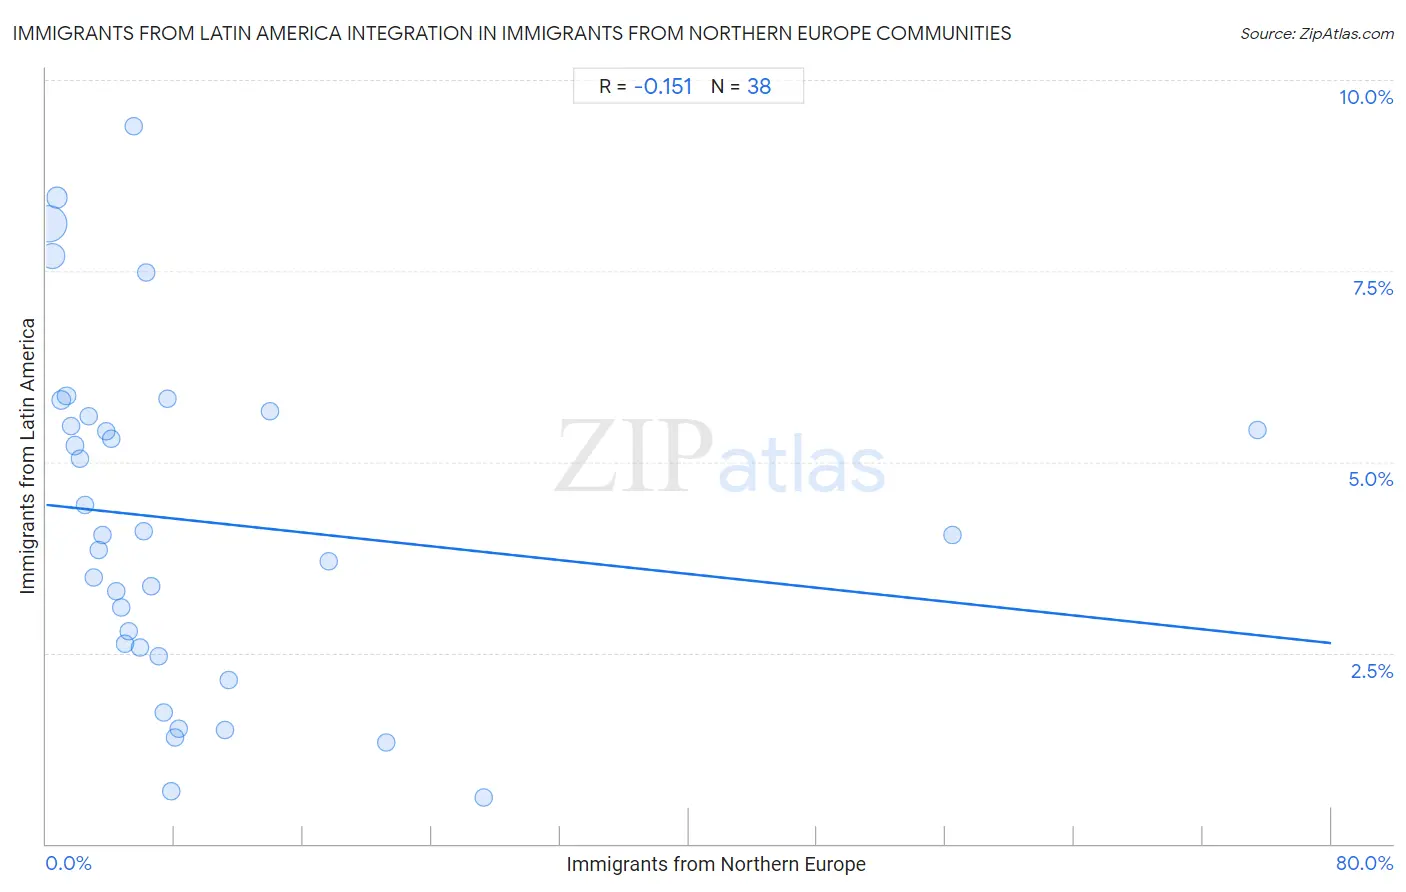 Immigrants from Northern Europe Integration in Immigrants from Latin America Communities